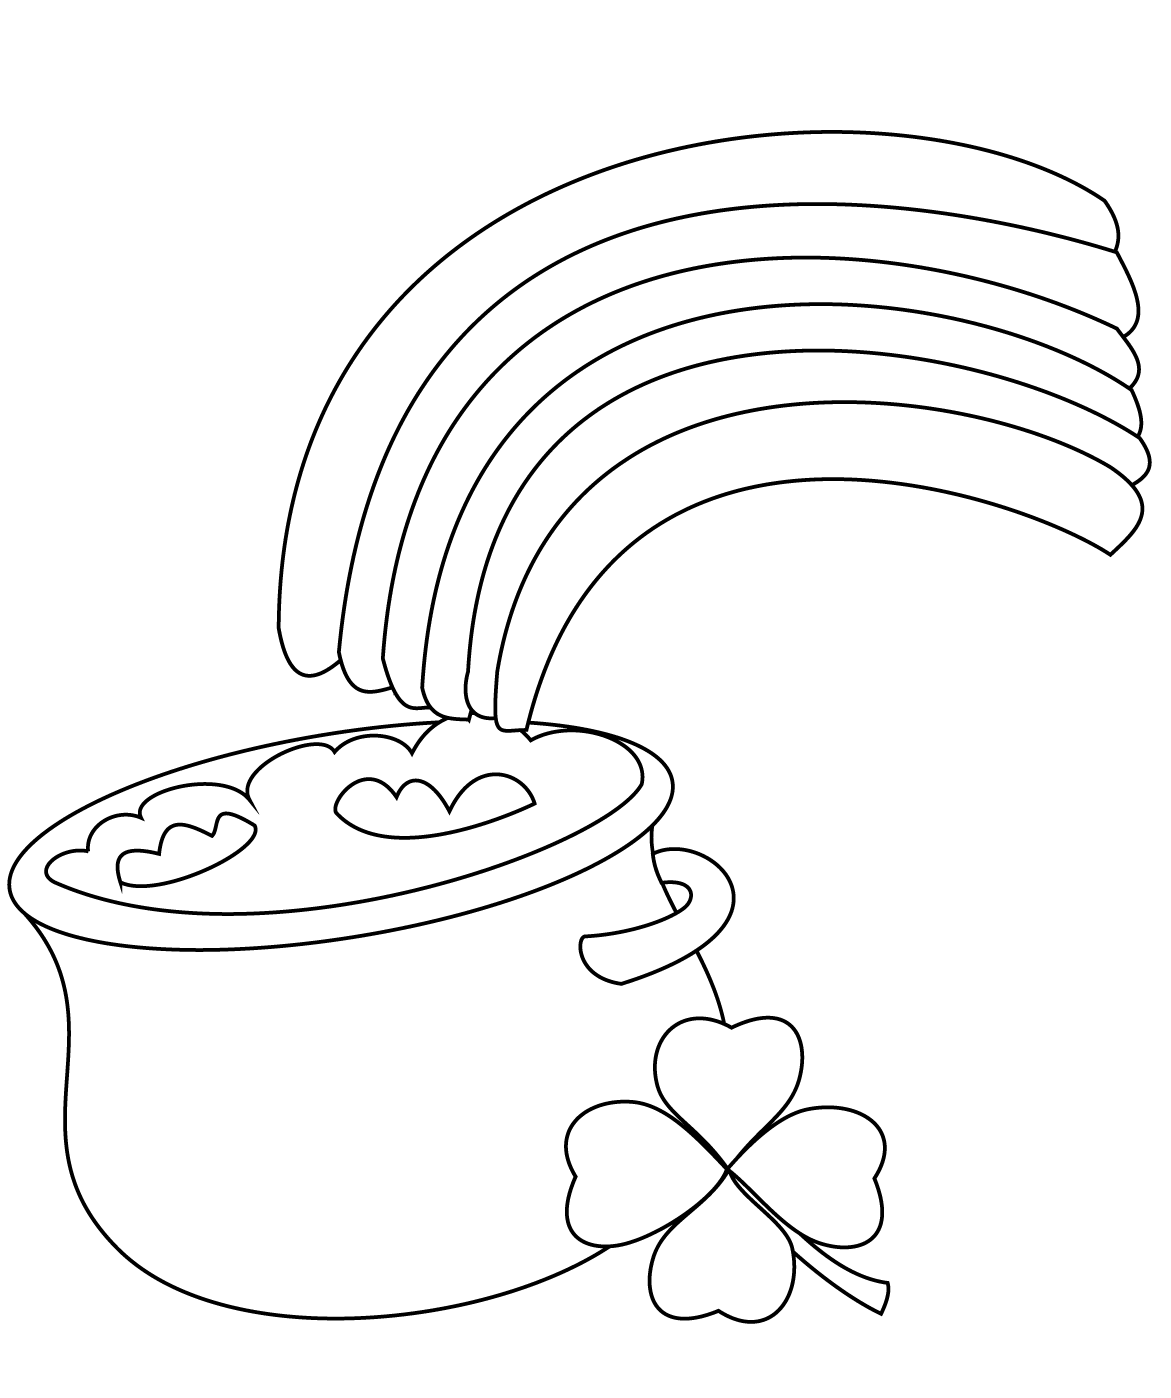 Rainbow and pot of gold coloring page